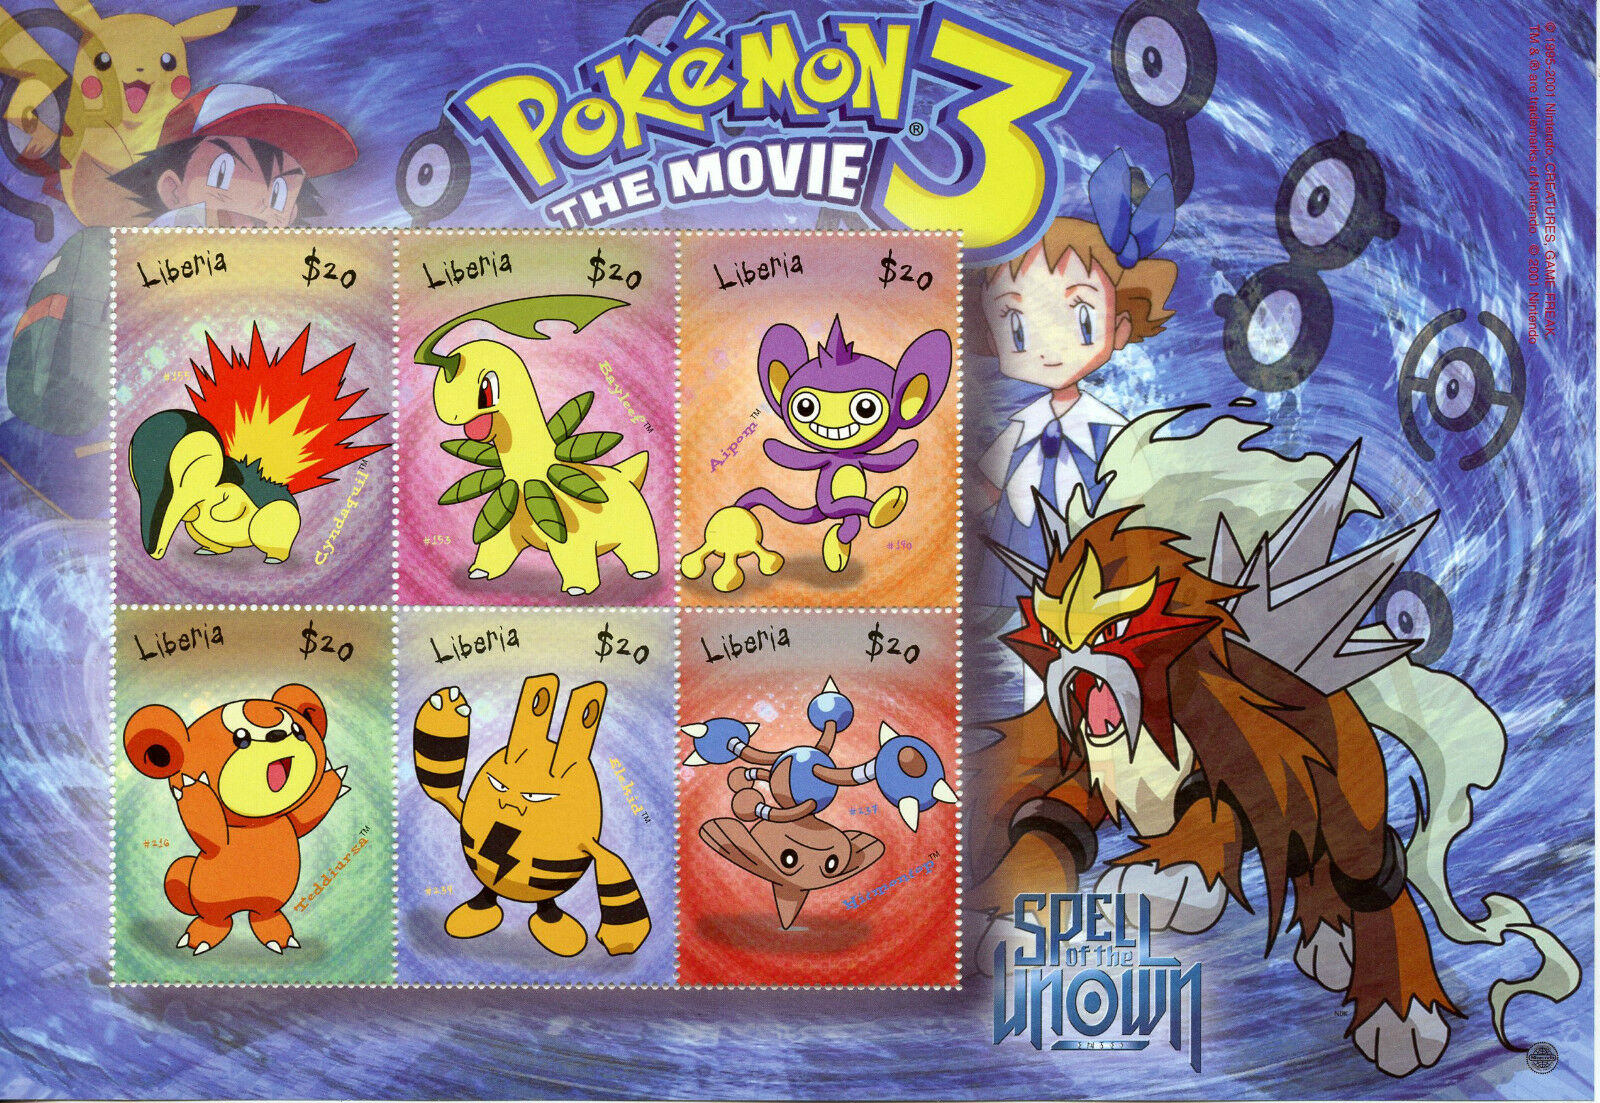 Liberia 2001 MNH Pokemon 3 The Movie Spell of Unown 6v M/S I Aipom Elekid Stamps